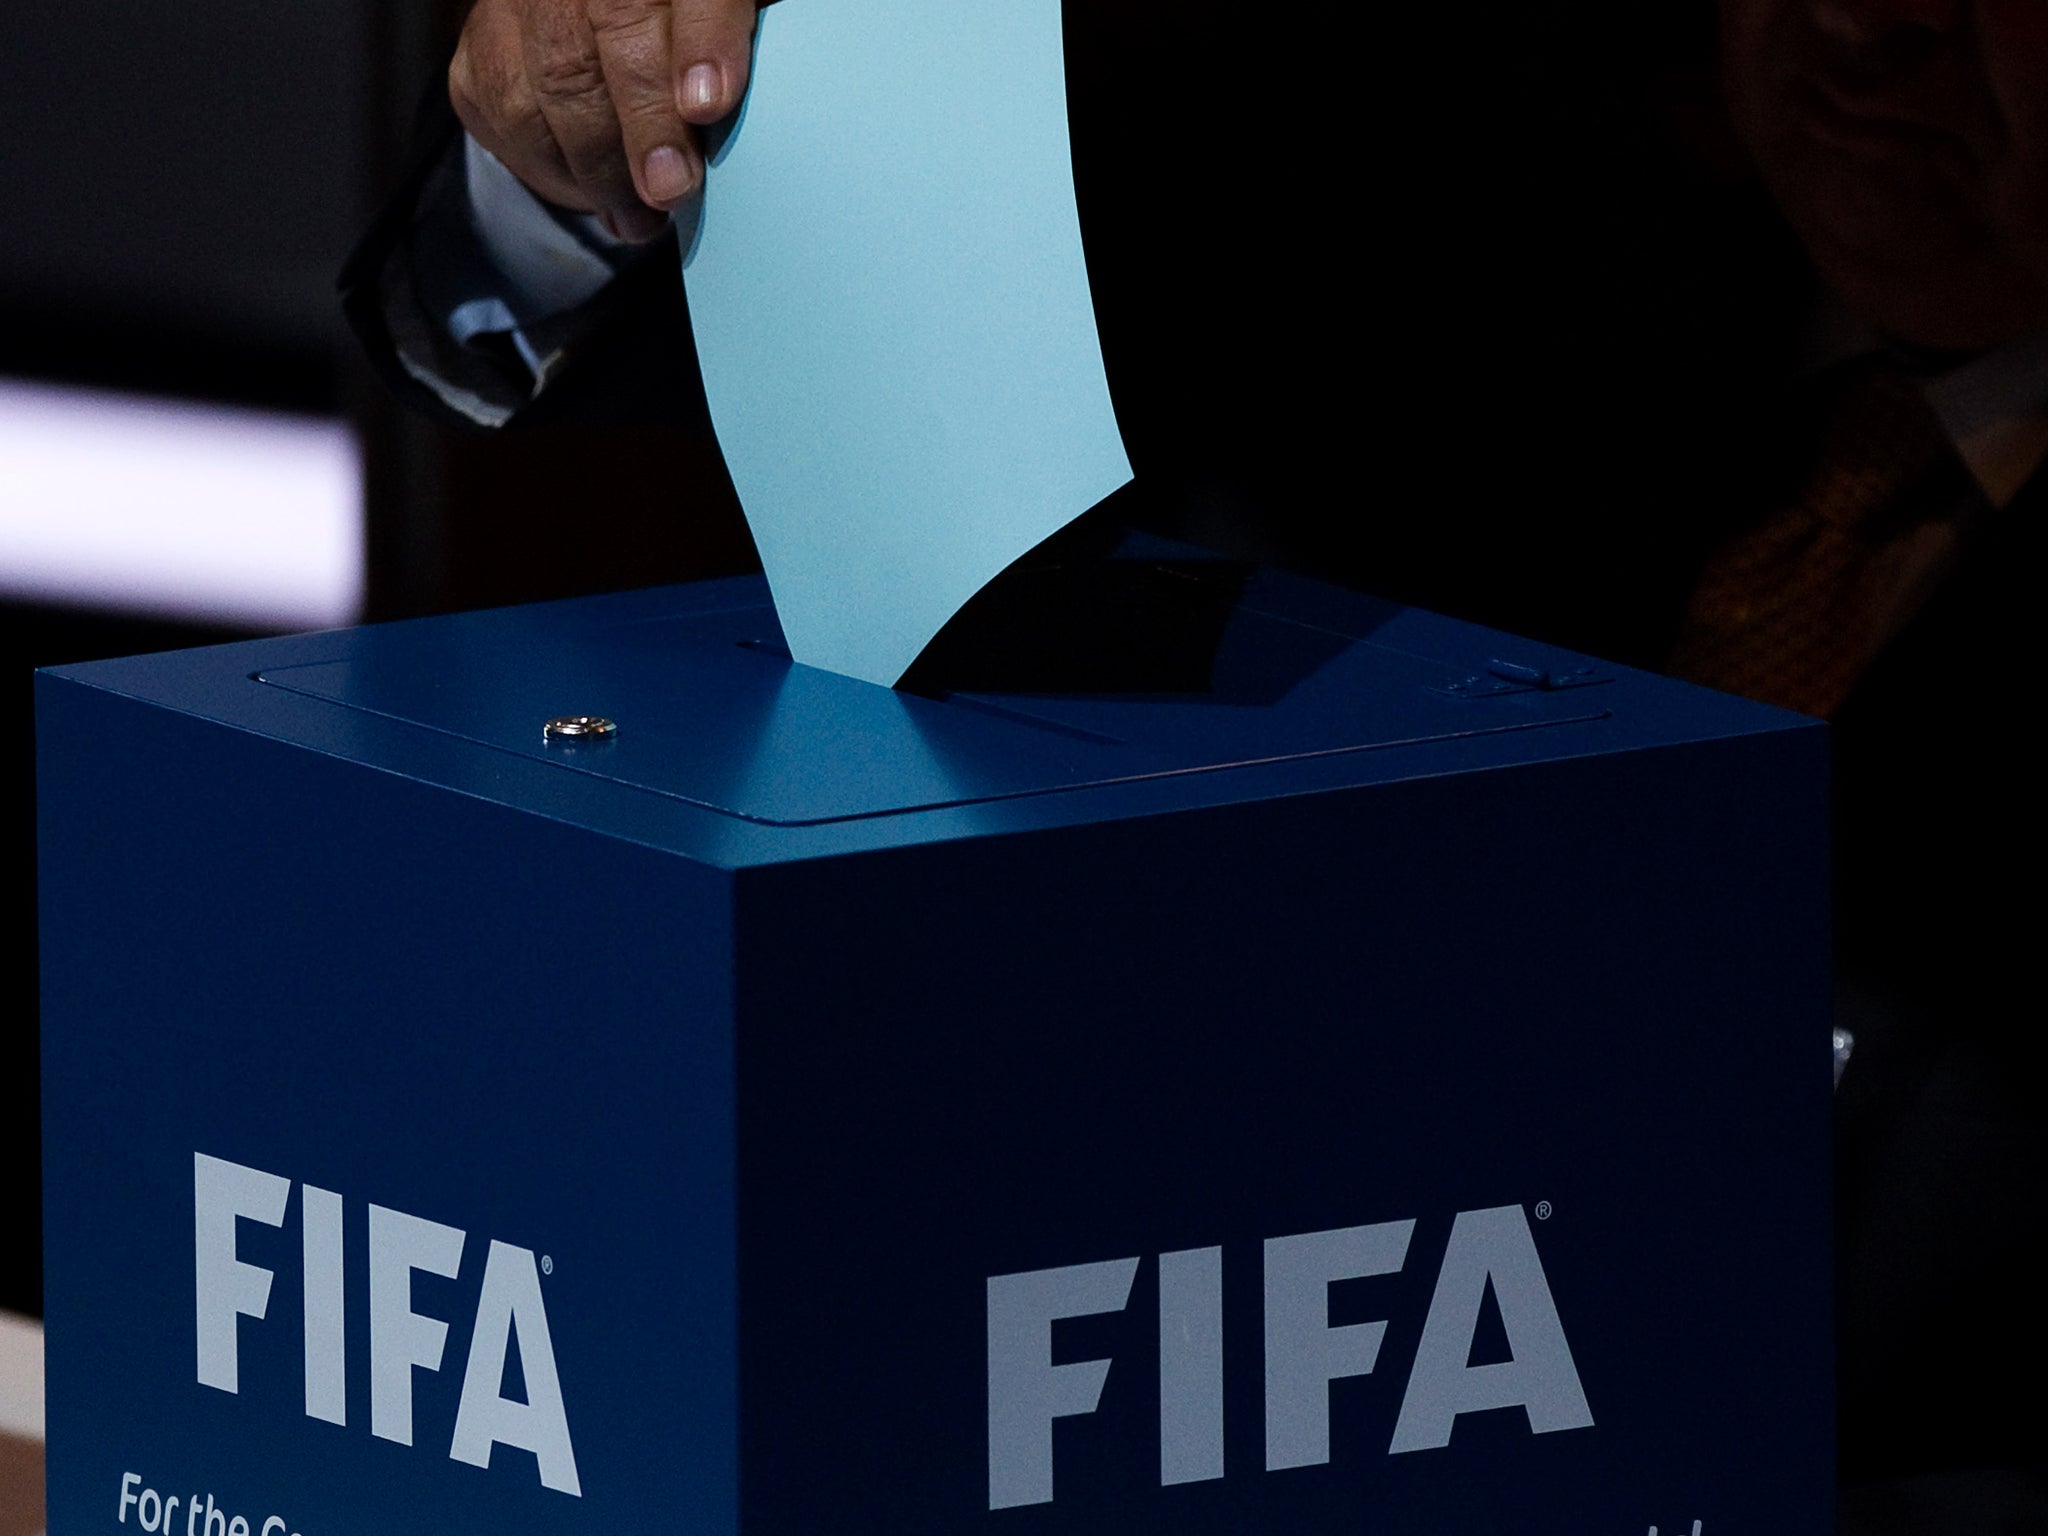 Under Fifa’s statutes, voting is carried out secretly